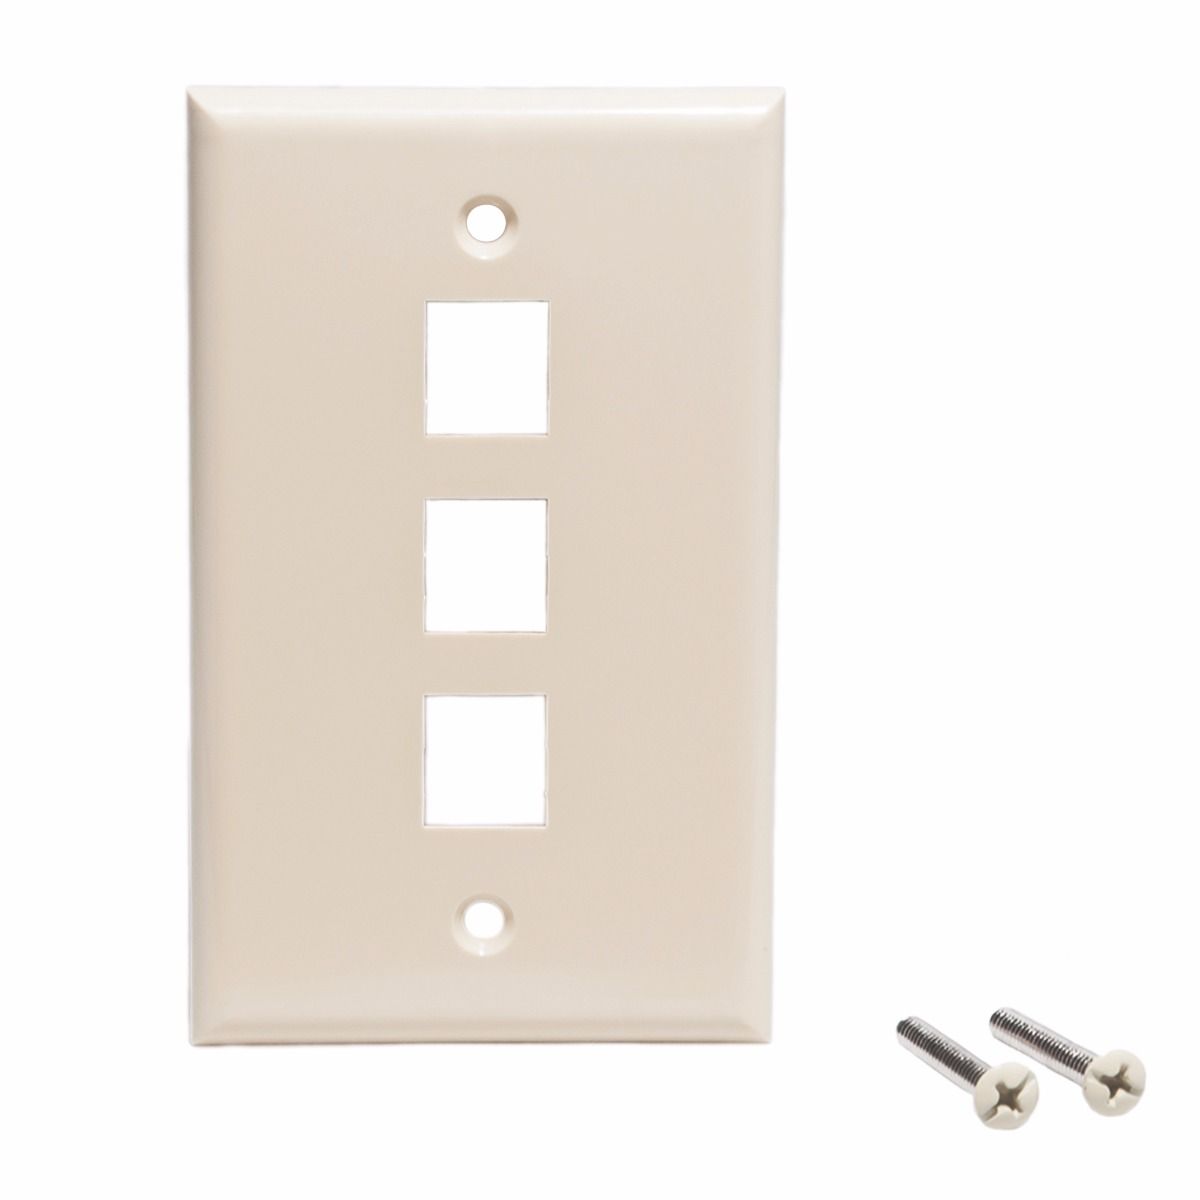 3-PORT OUTLET FLUSH Wall Plate- Ivory